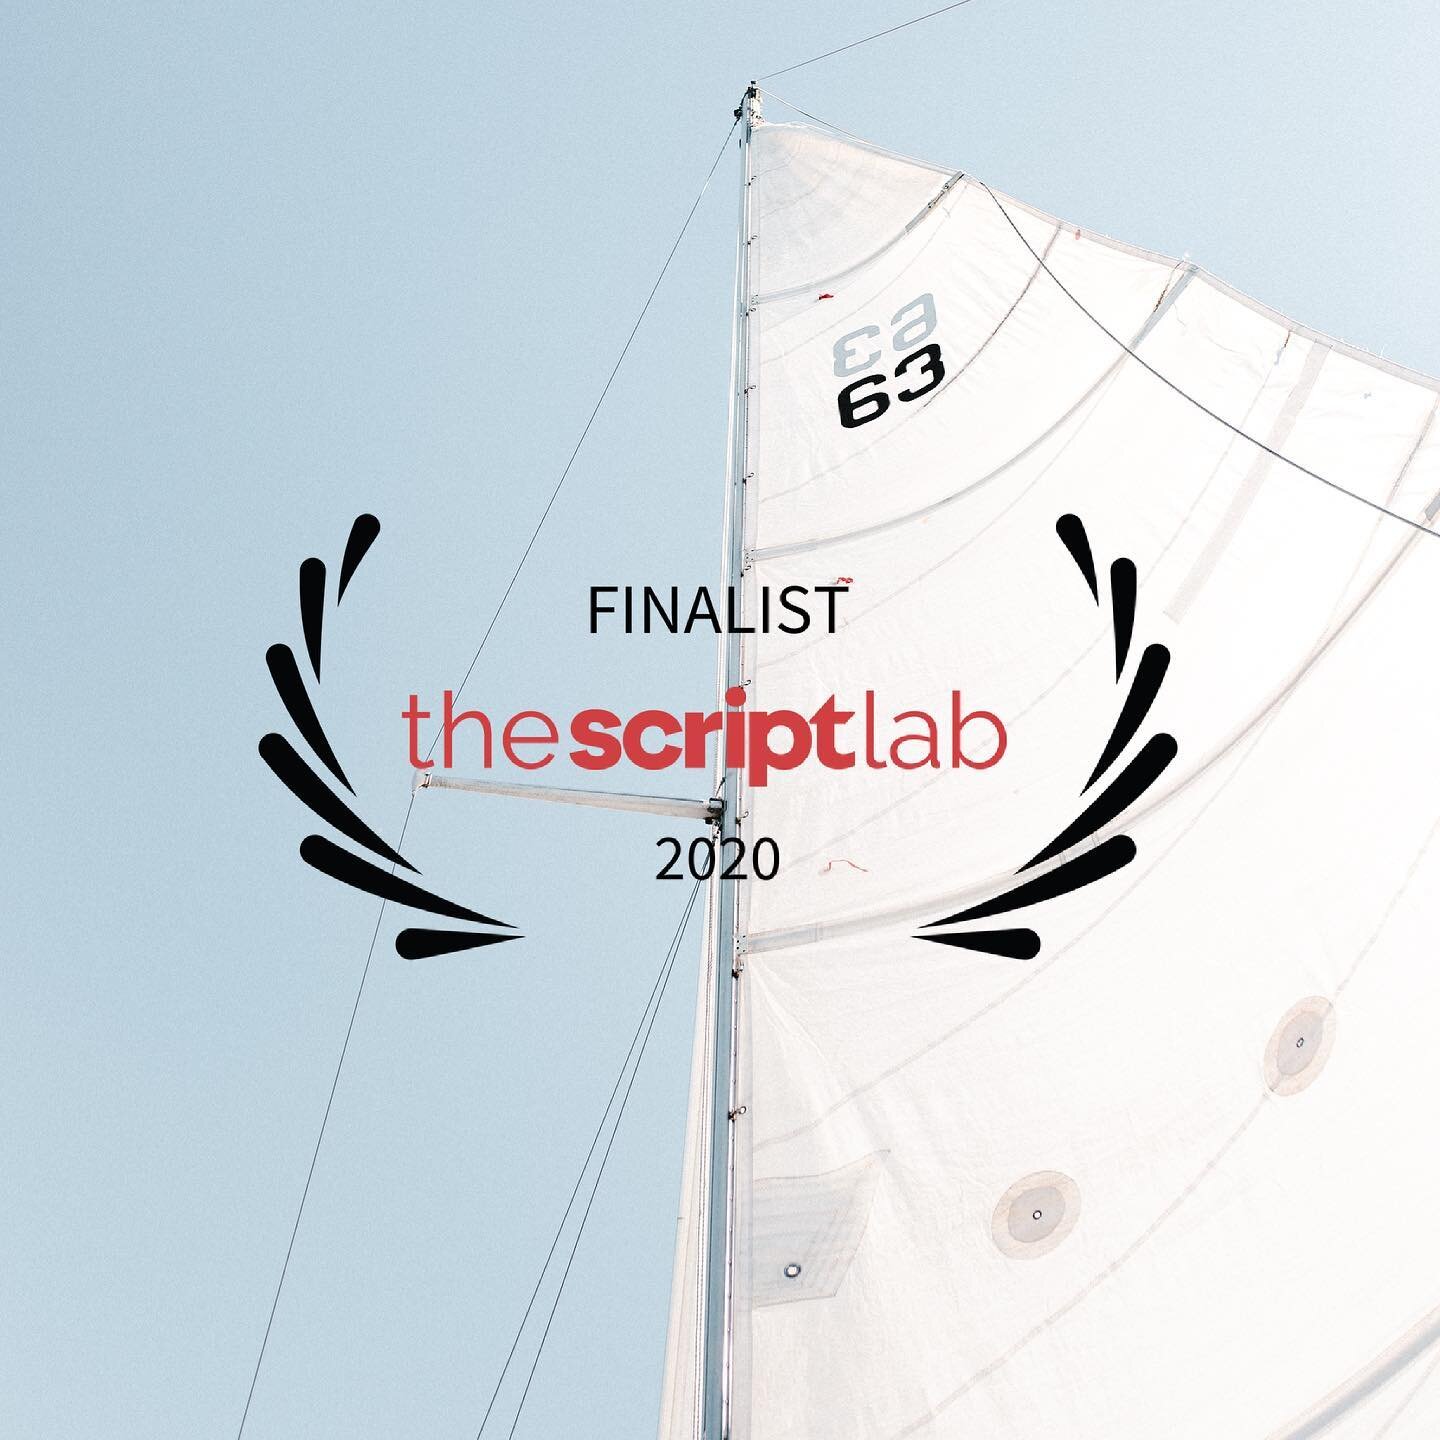 ⛵️ THE SCRIPT LAB 2020 ⛵️

Points of Sail is a story about revisiting the past, healing friendships and a unconditional, shared love of sailing.

We can&rsquo;t wait to start this journey from script to the screen.